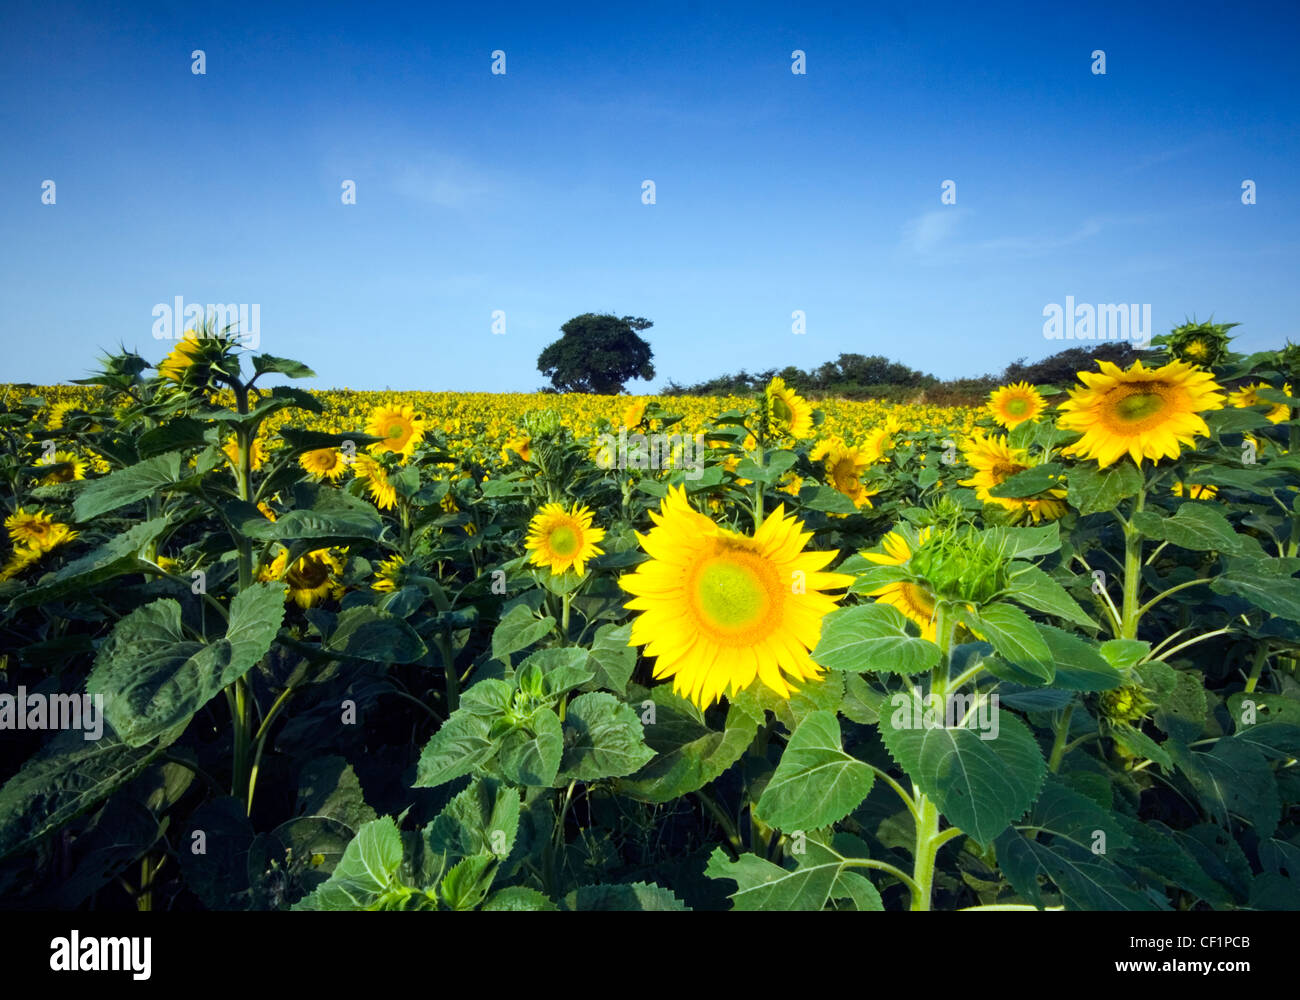 Field of Sunflowers. Sunflowers can grow up to 3 metres tall with the flower head reaching 30 cm in diameter. Stock Photo